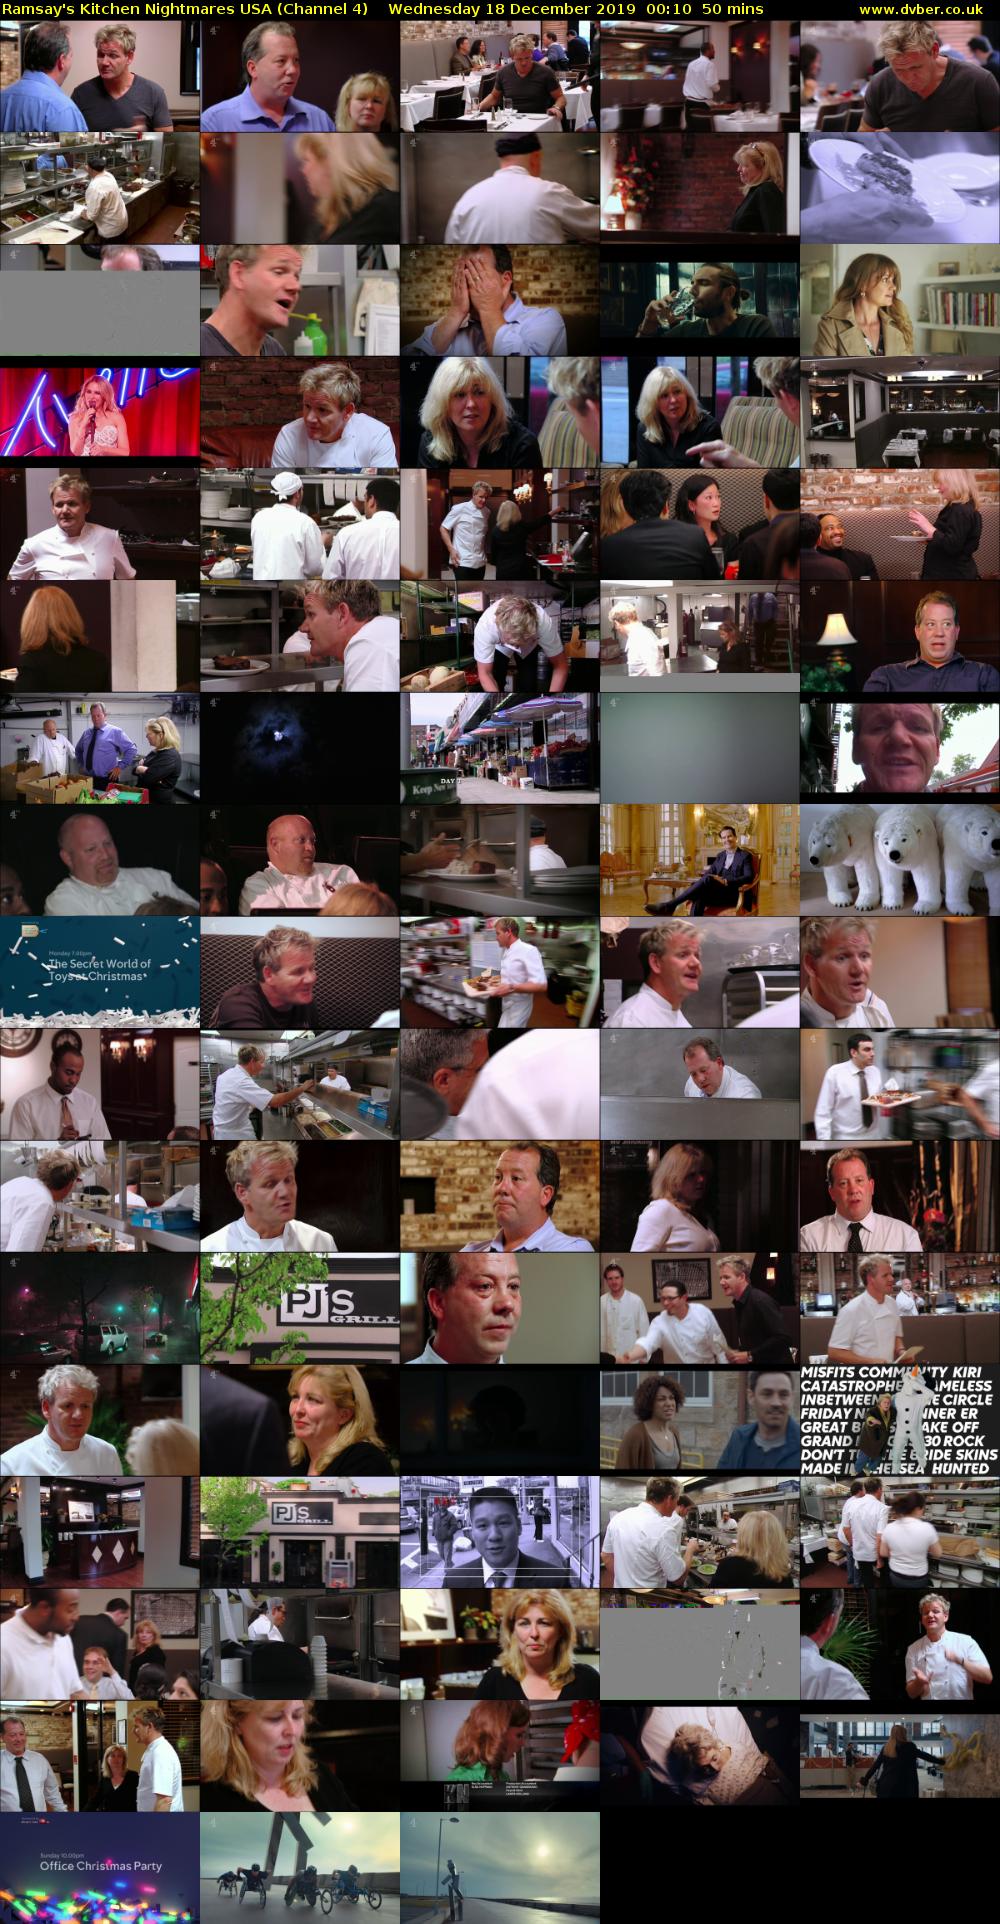 Ramsay's Kitchen Nightmares USA (Channel 4) Wednesday 18 December 2019 00:10 - 01:00